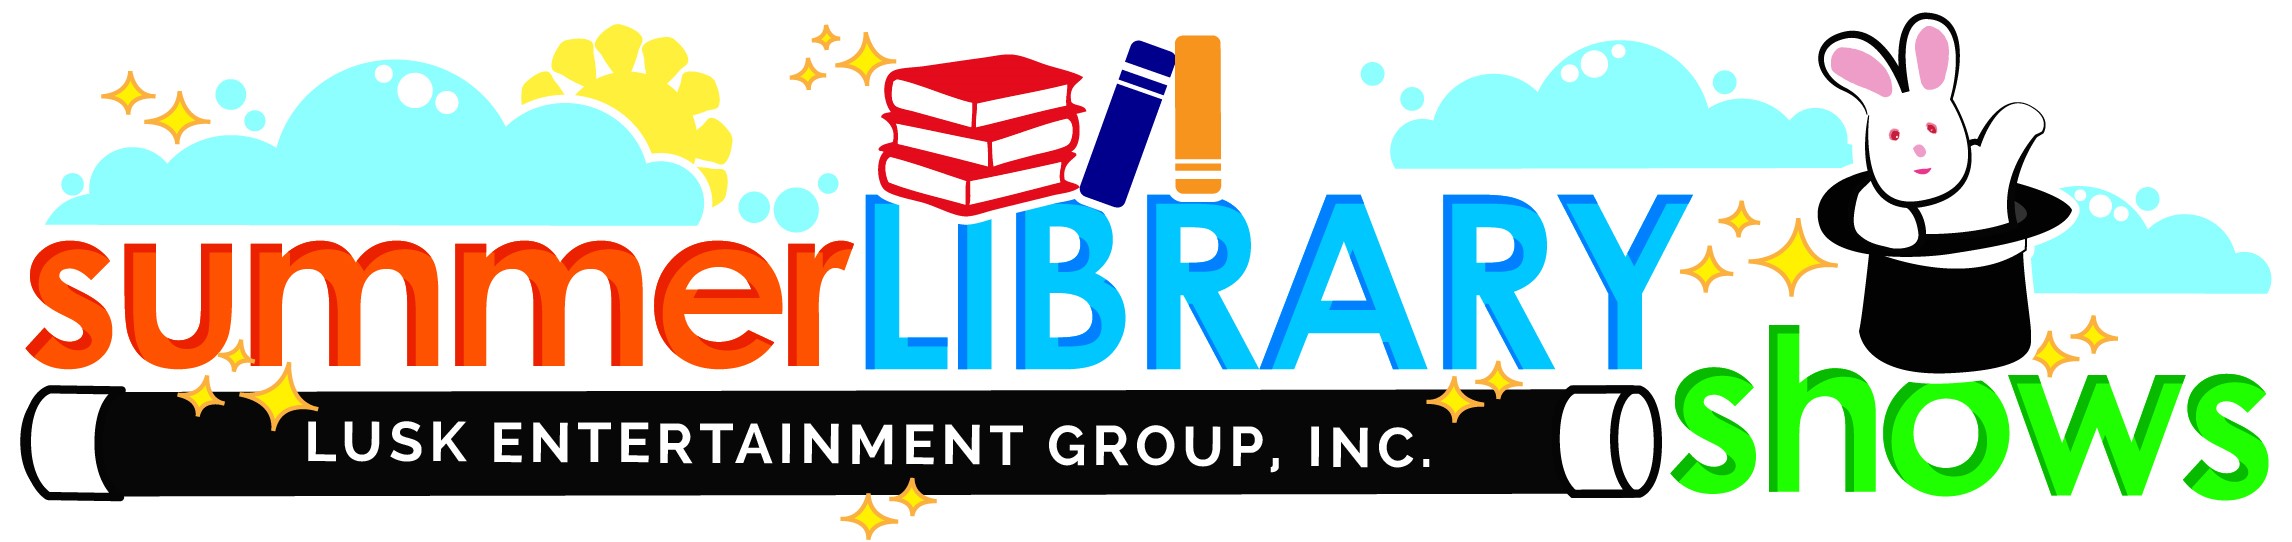 Summer Library Shows by Lusk Entertainment Group, Inc.